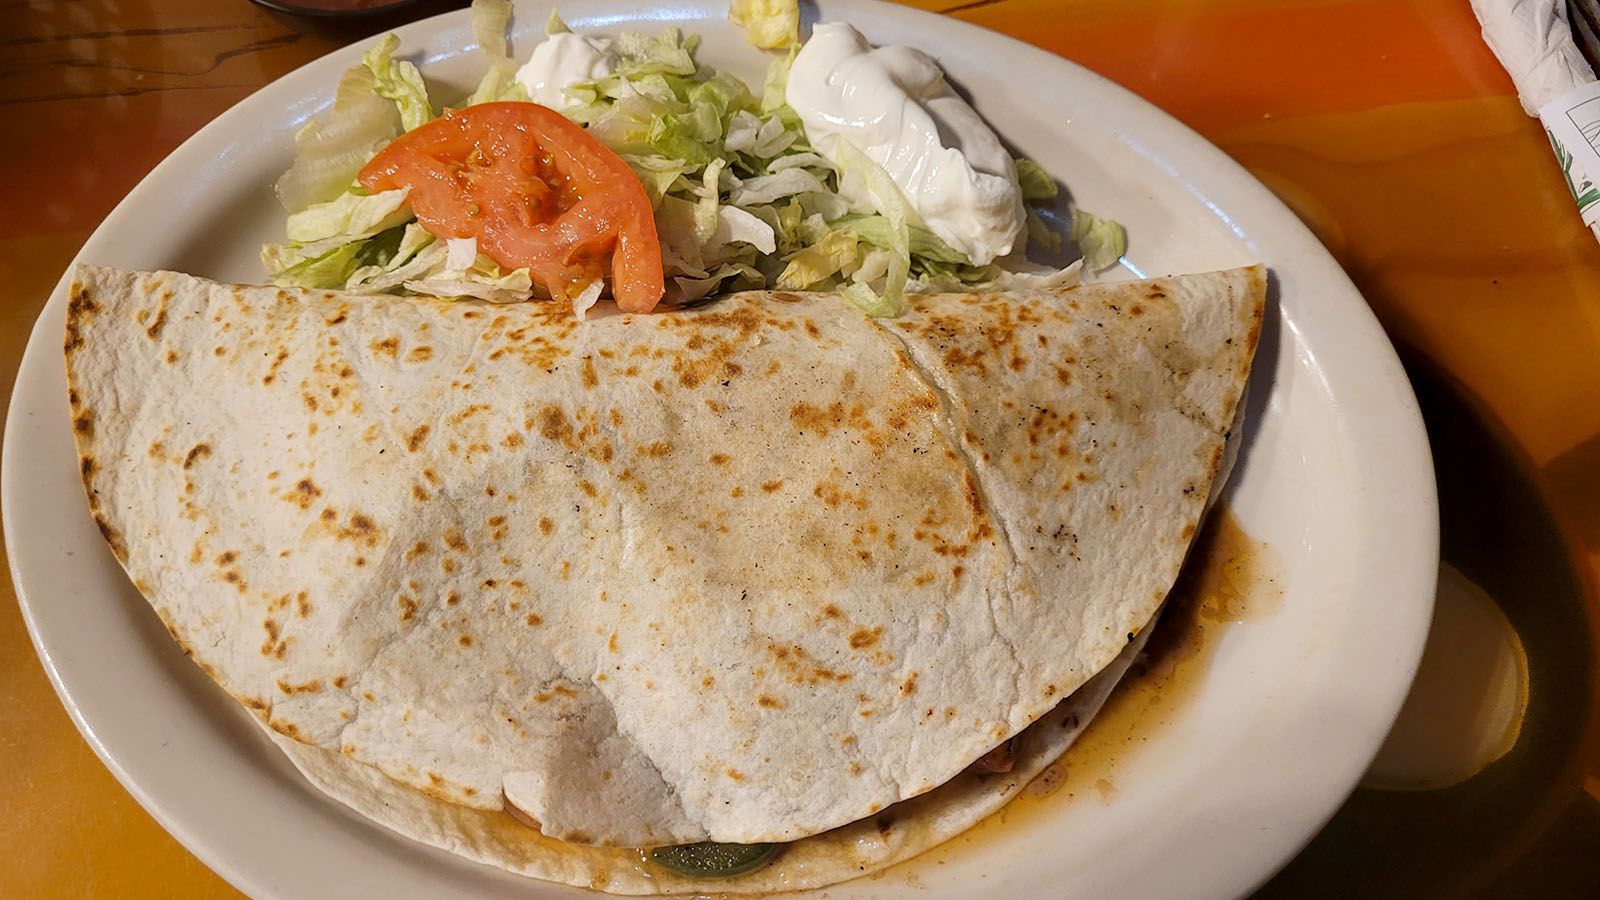 Cebolla's Mexican Grill doesn't skimp on portion sizes.